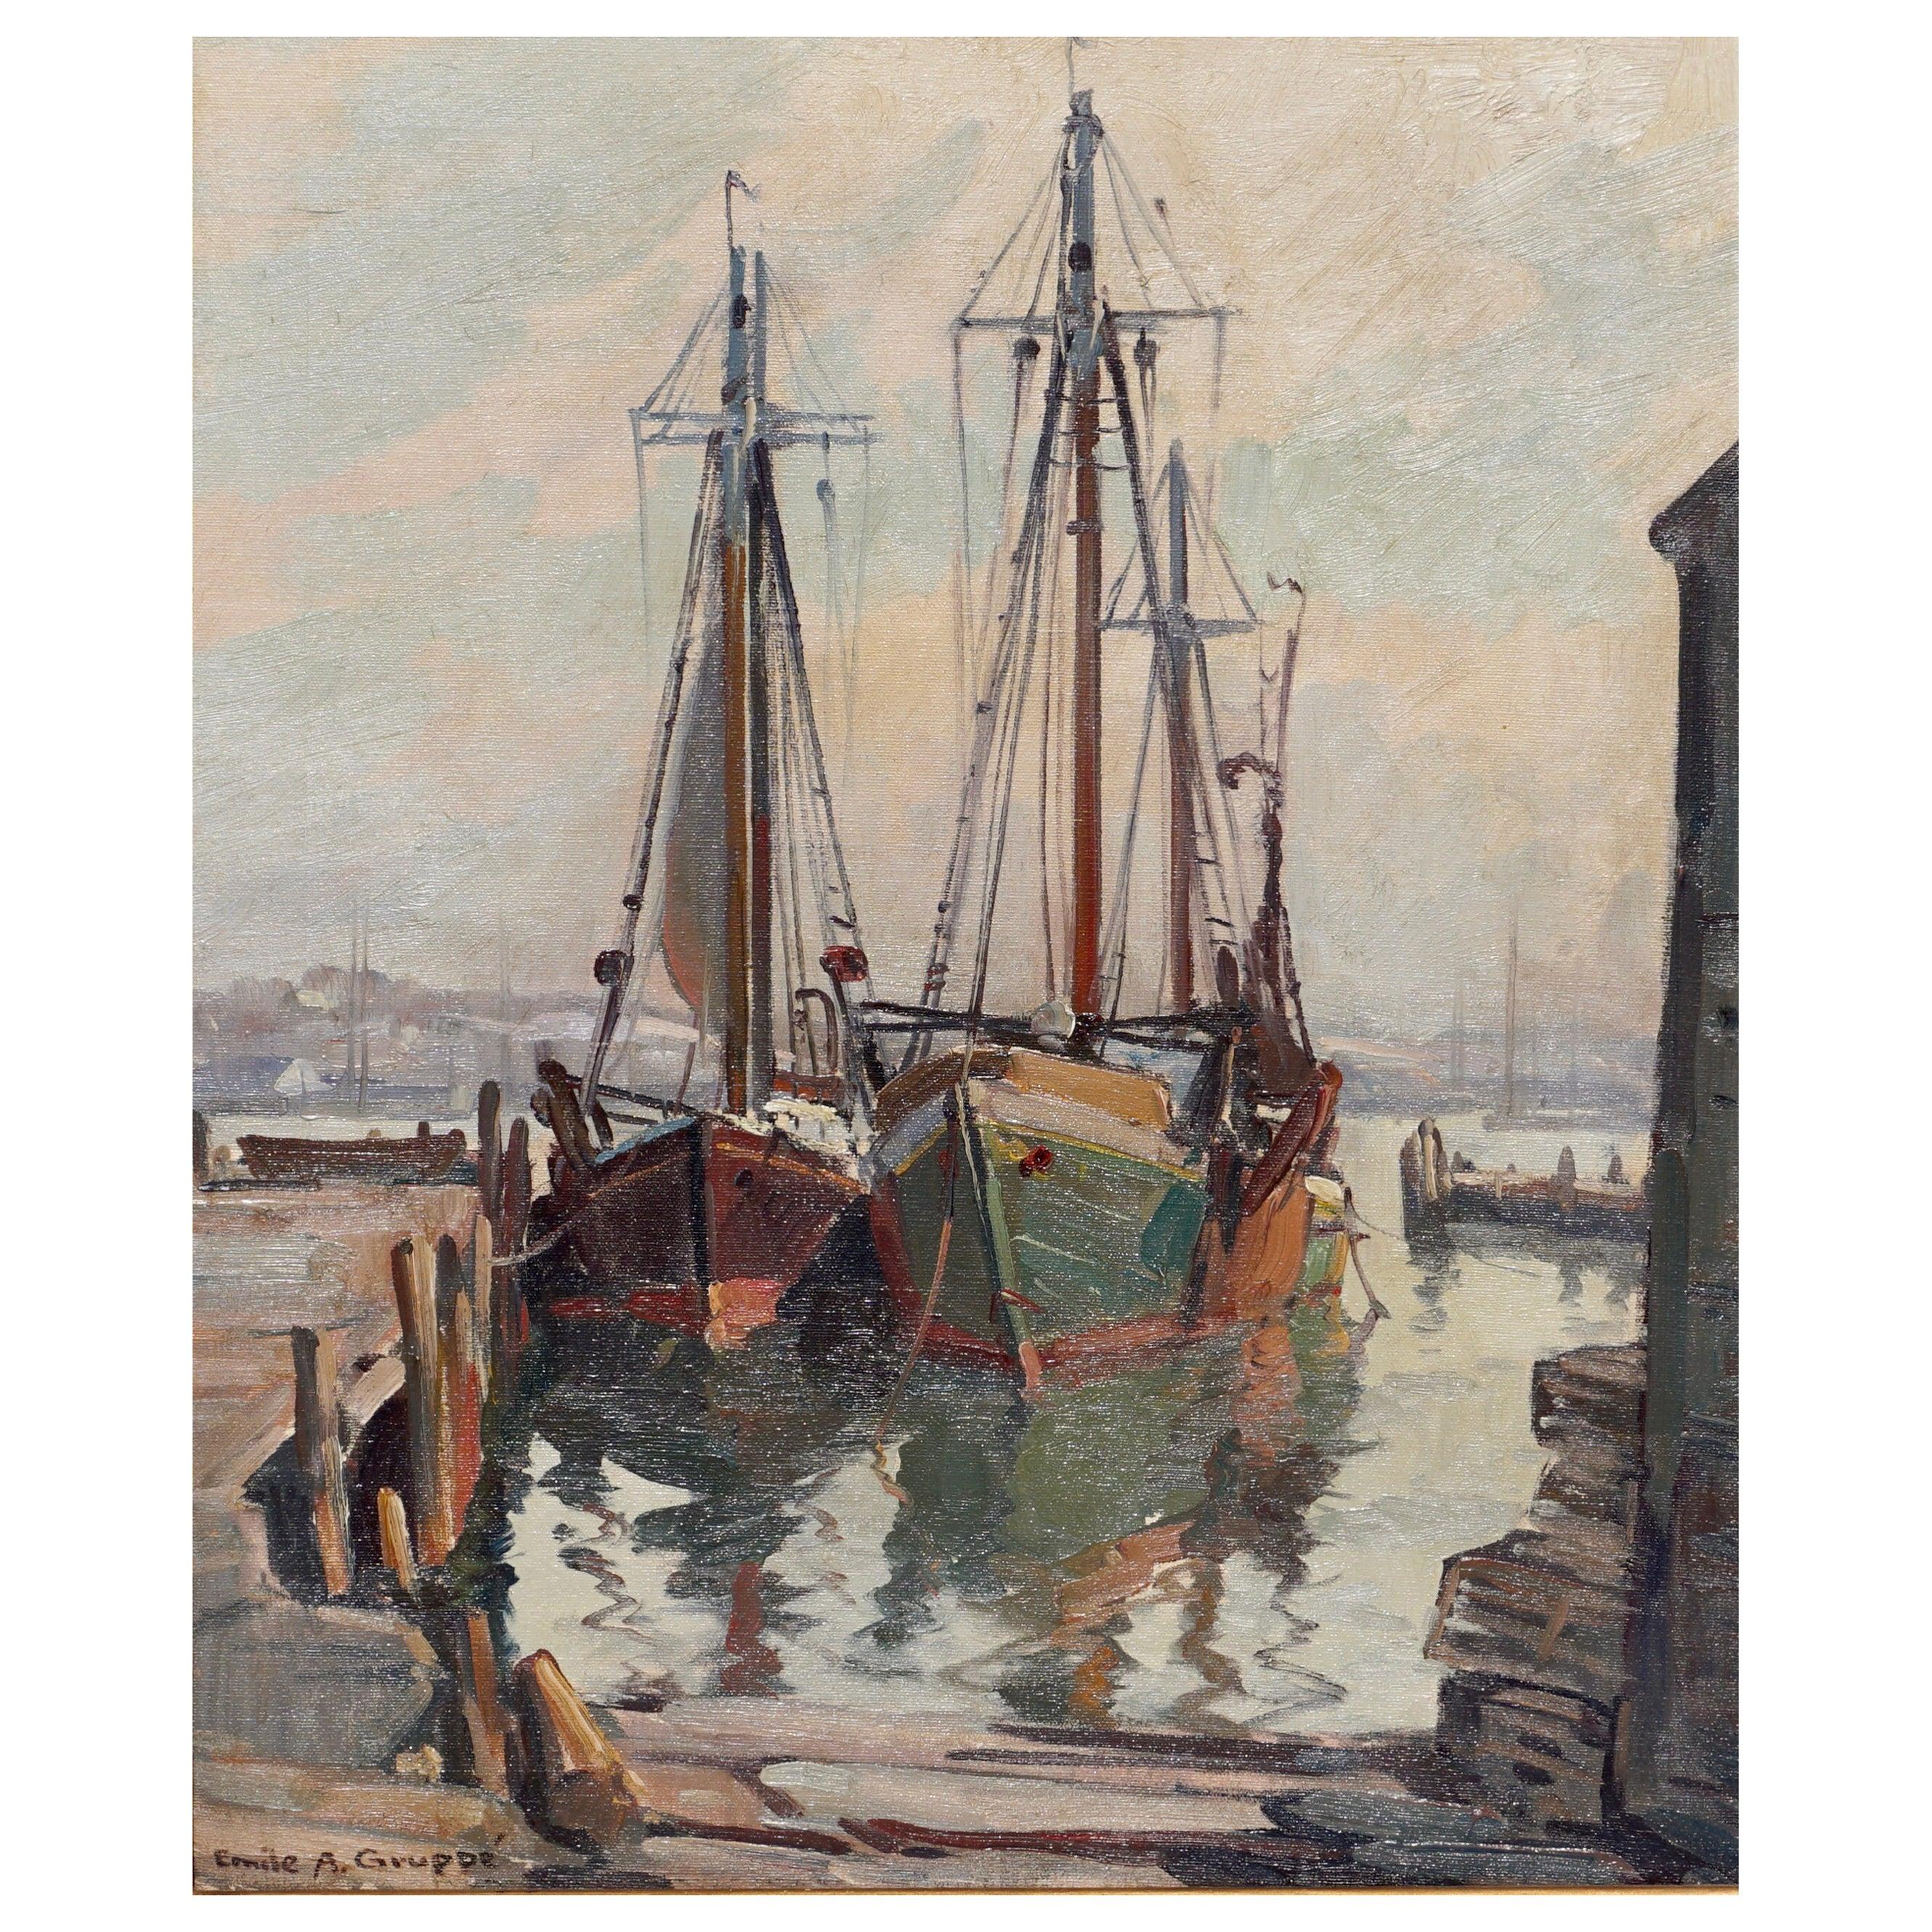 Emile Albert Gruppe (American, 1896 - 1978), "Morning, Gloucester", oil on canvas, signed lower left "Emile A. Gruppe", 

Canvas: 24 x 20 Inches
Framed: 27.25 x 23.25 Inches

Condition. No inpaint or restorations. Unlined. Original frame..

Emile